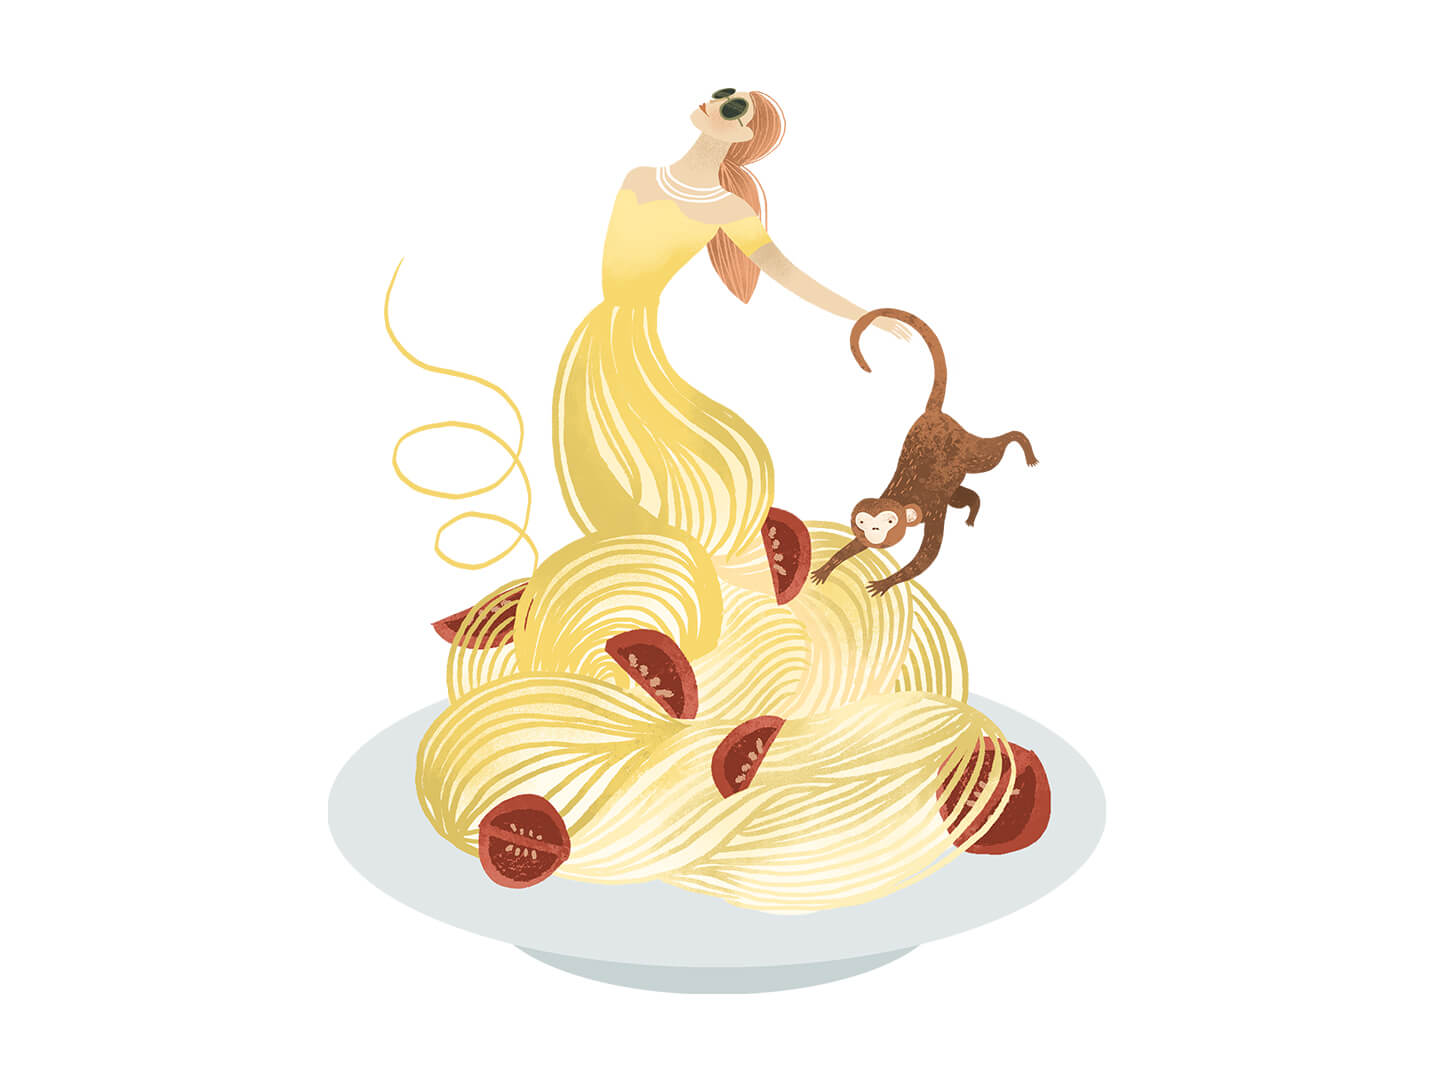 Illustration of a woman coming out of a plate of spaghetti. the spaghetti forms as her dress. featuring Renato's in palm Beach